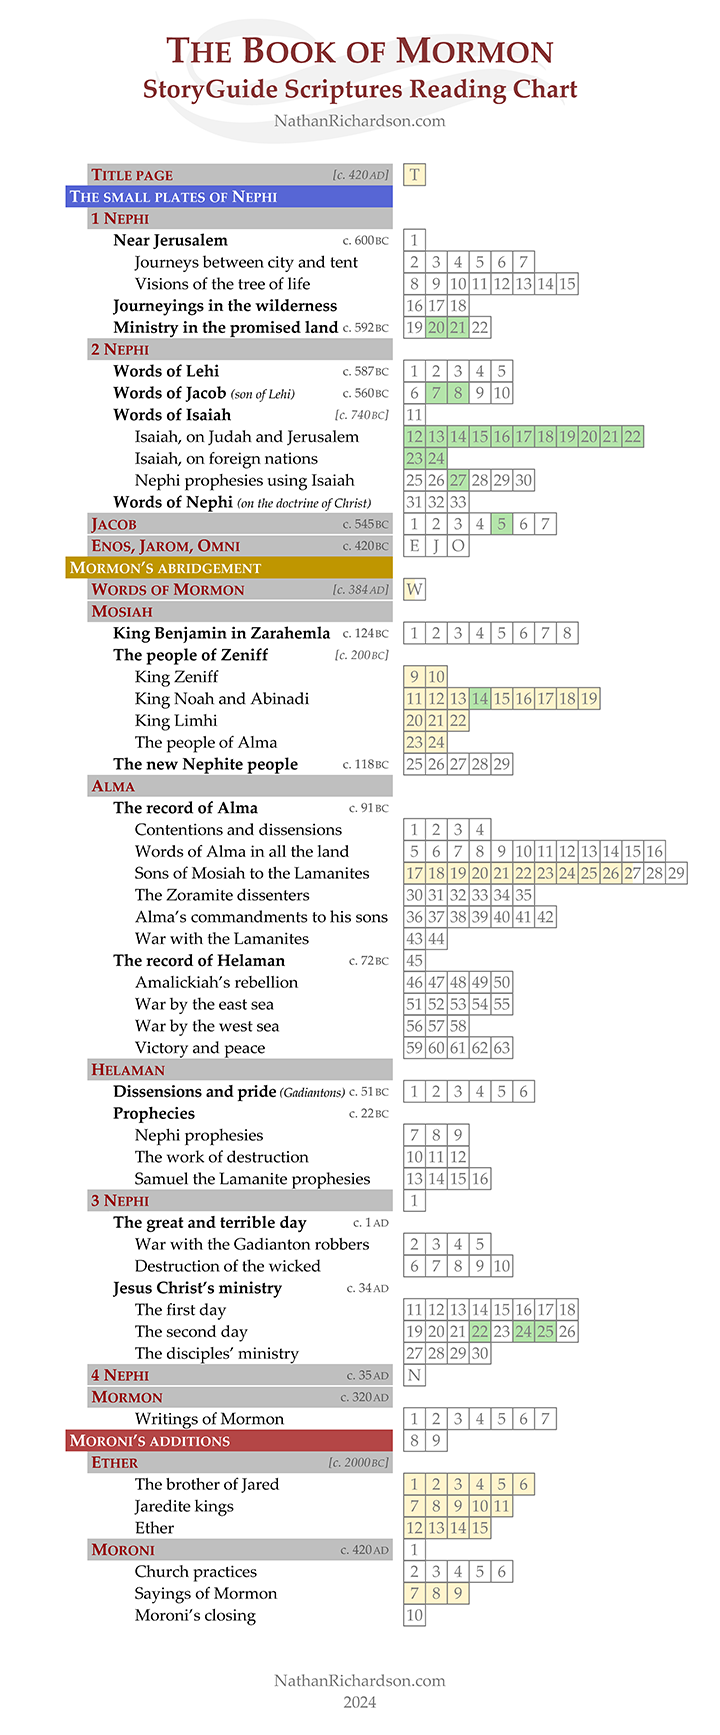 StoryGuide Scriptures reading chart, Book of Mormon, 2024